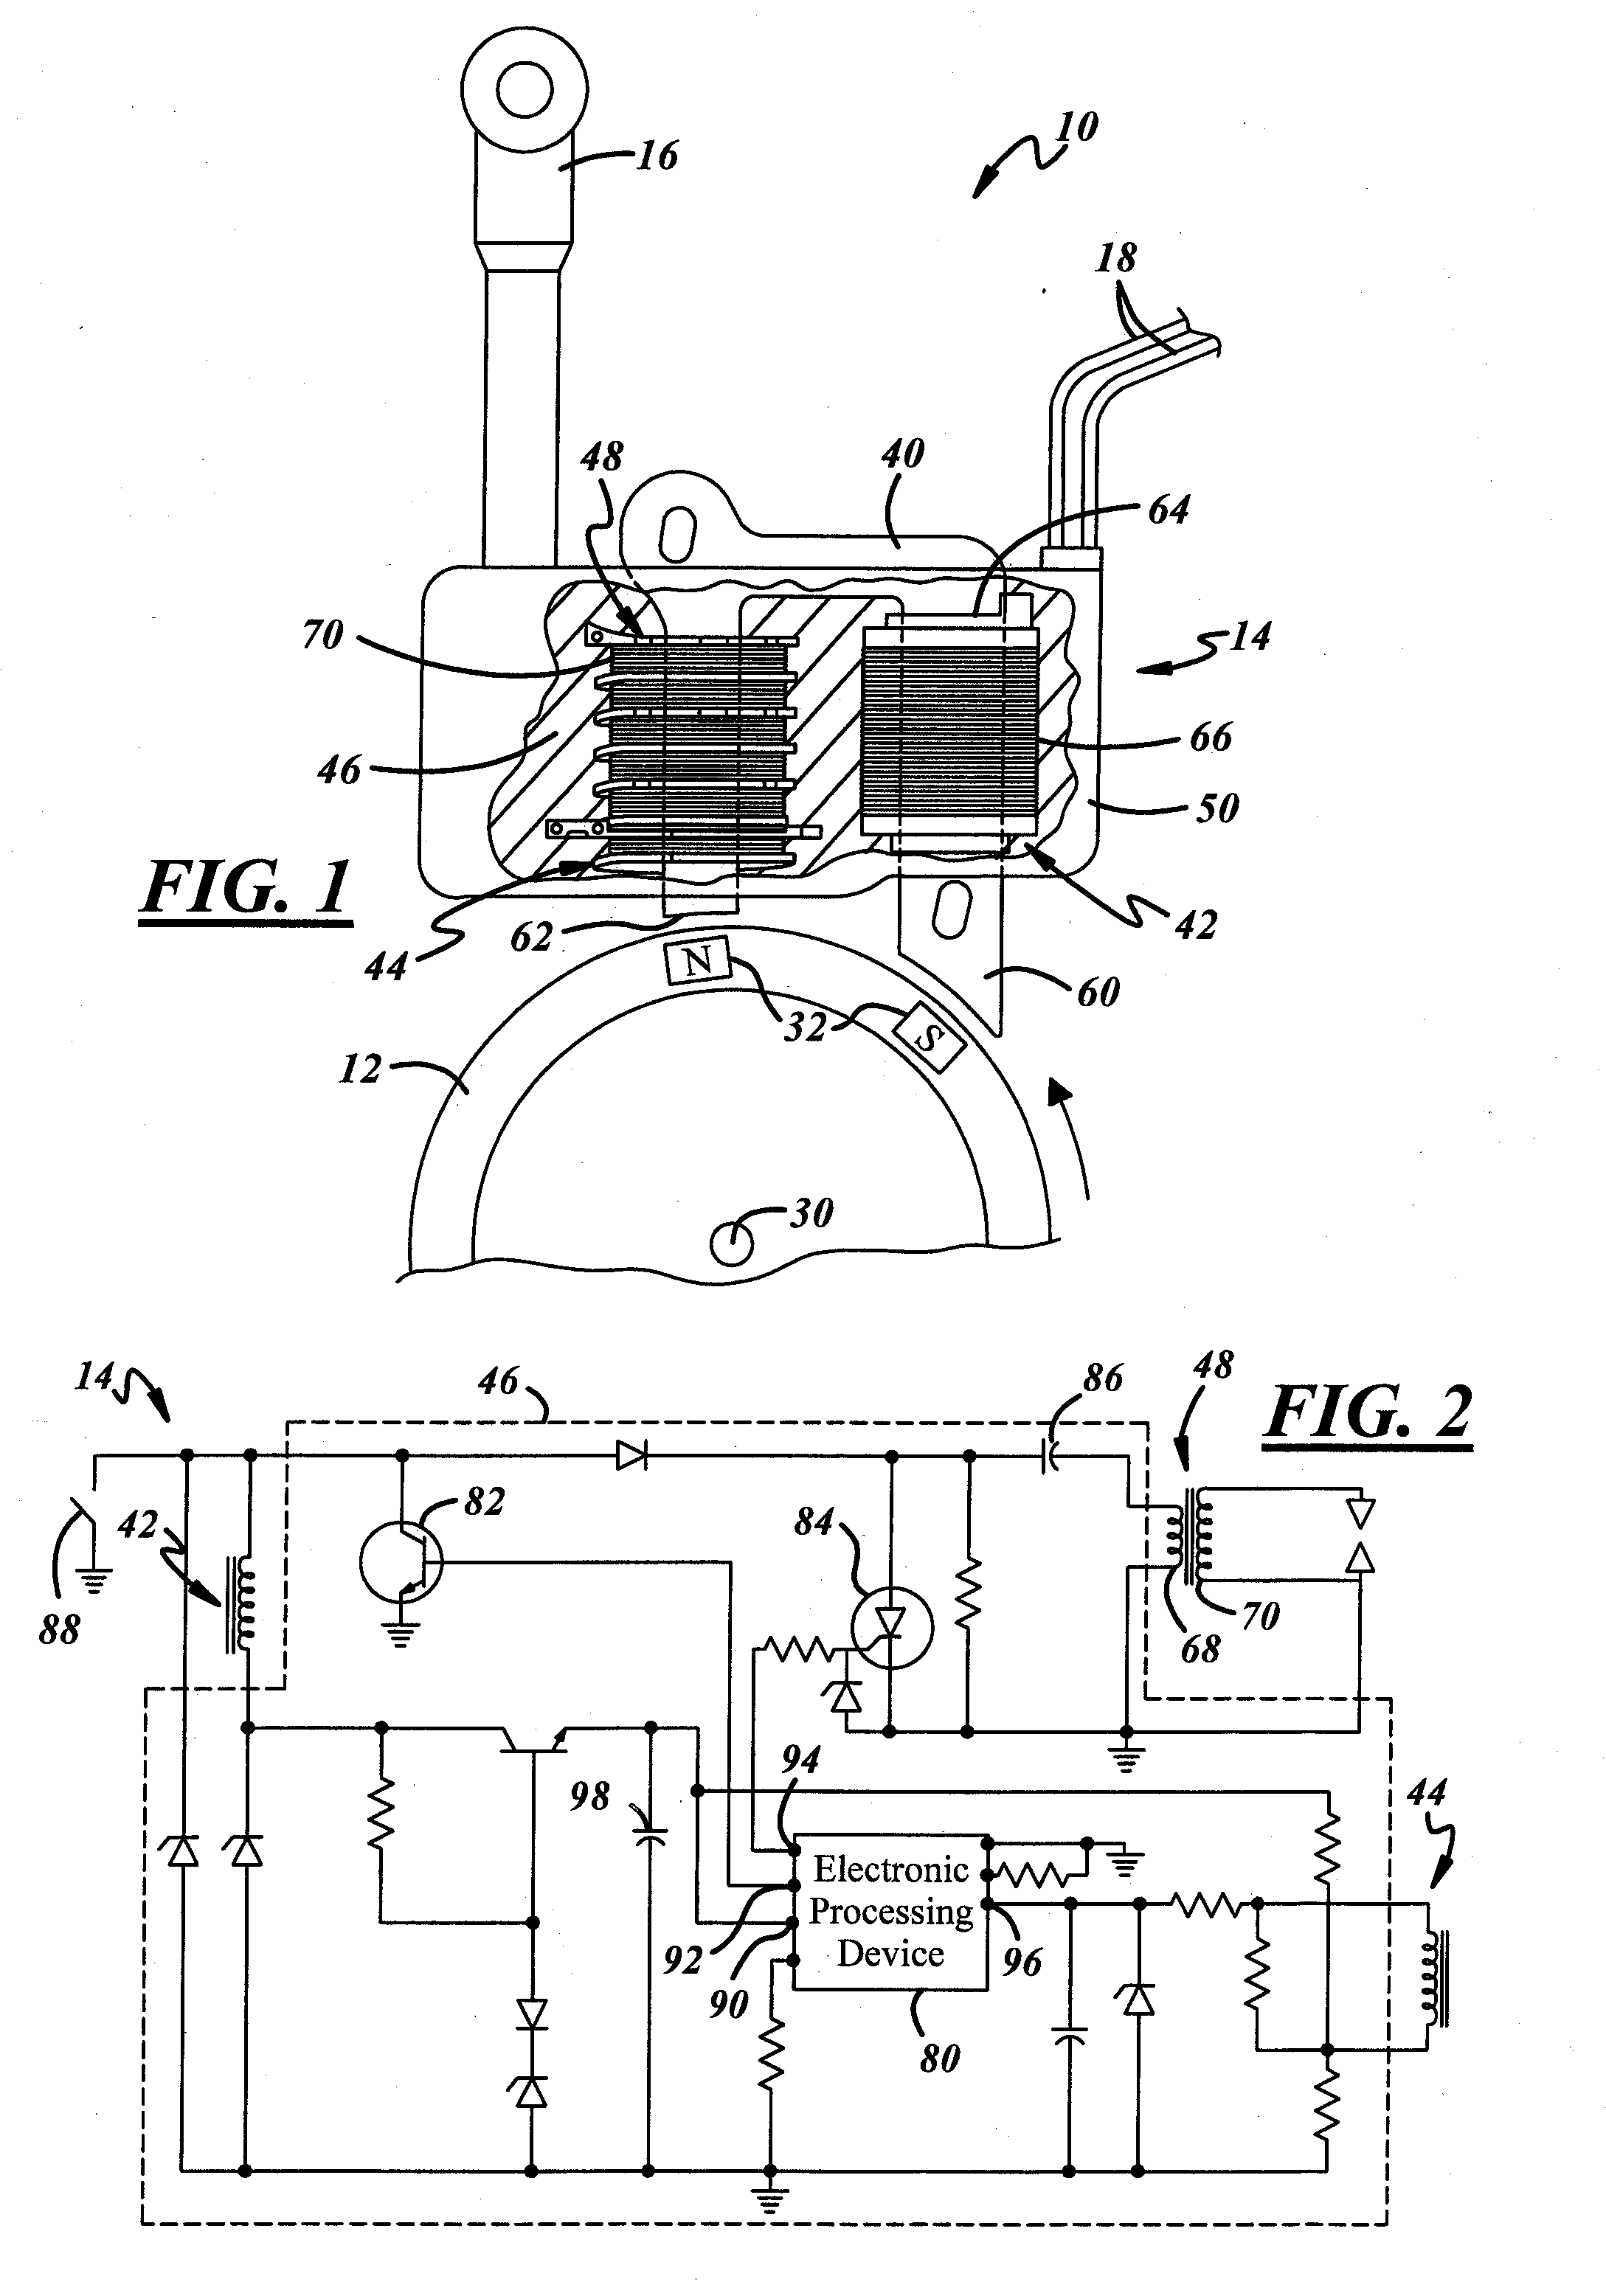 Ignition Module For Use With A Light-Duty Internal Combustion Engine